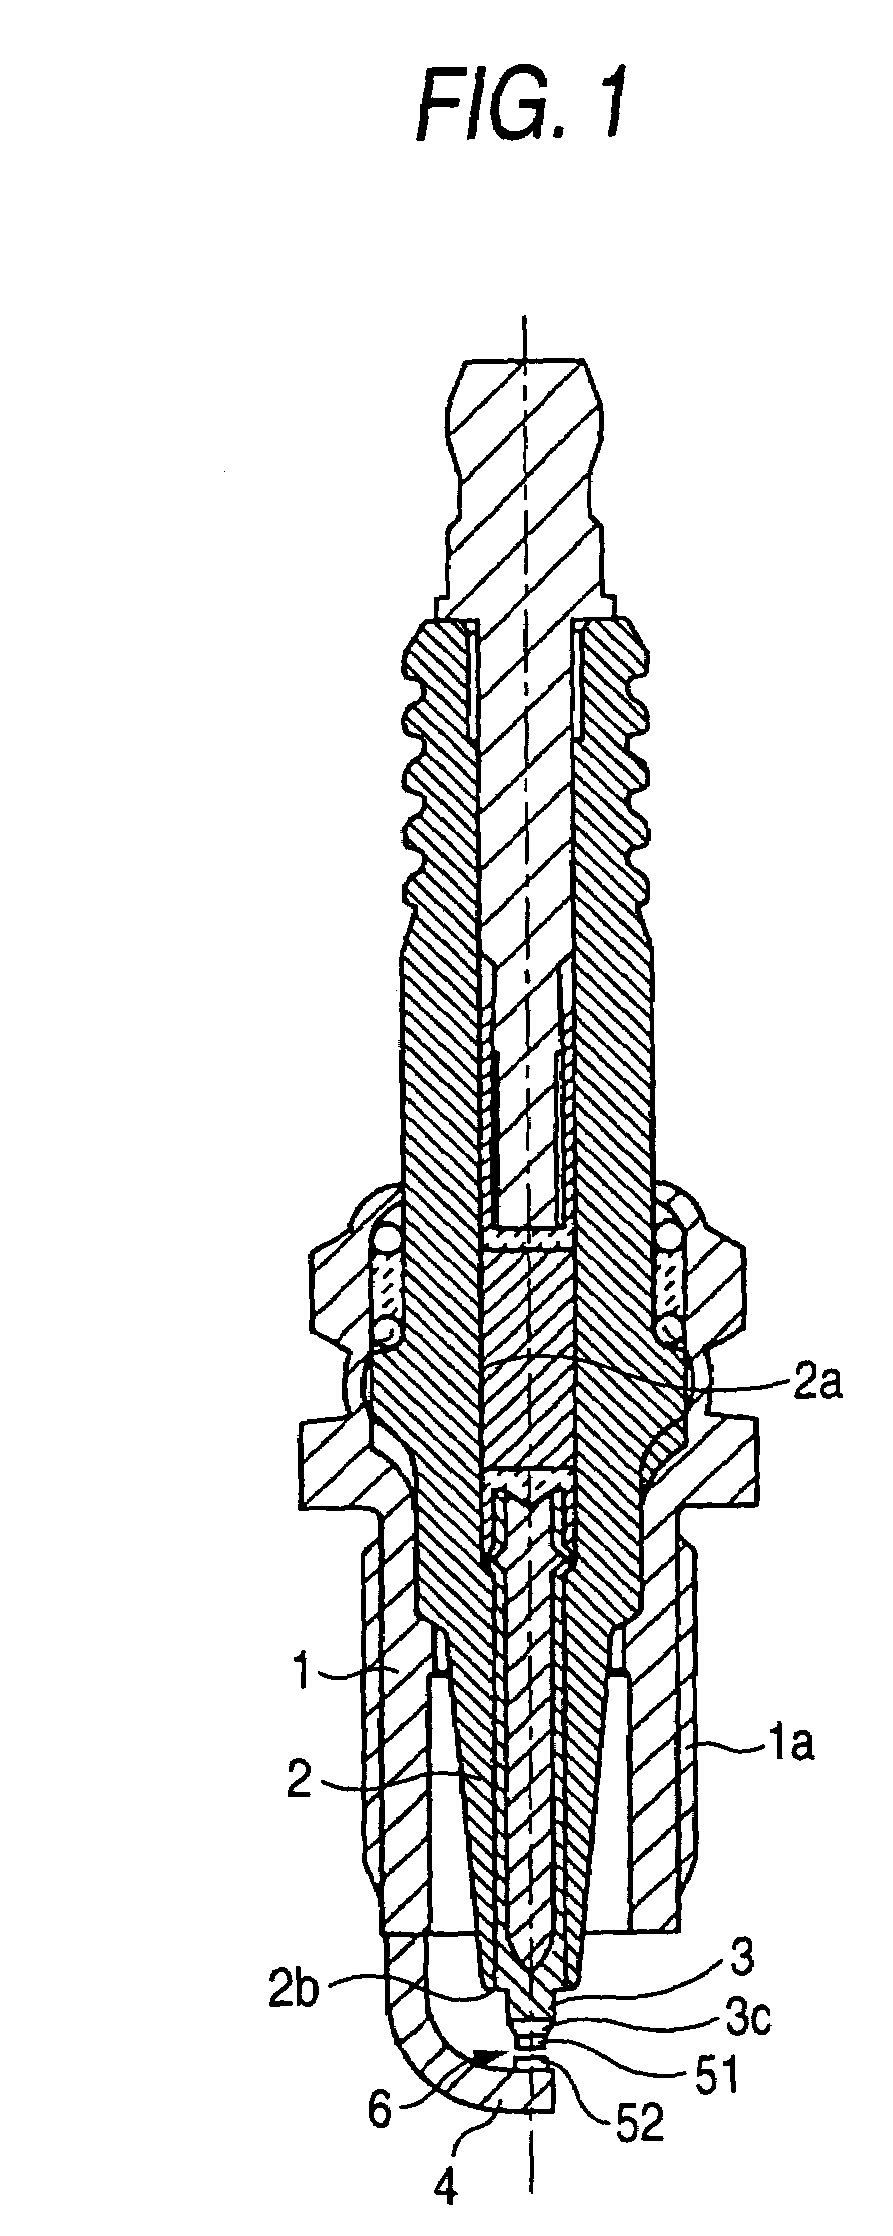 Spark plug having a specific structure of noble metal tip on ground electrode